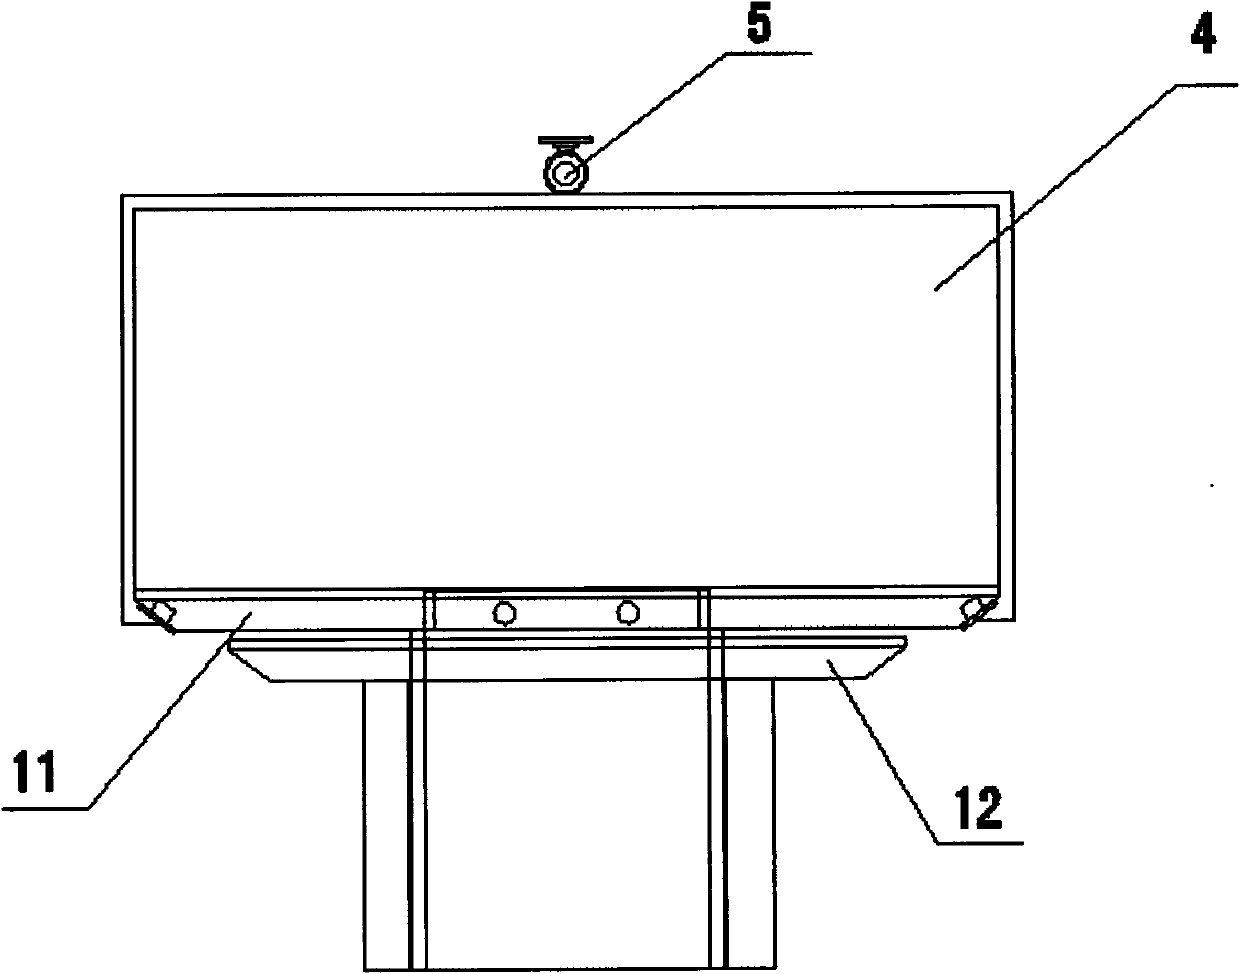 Conference table facilitating remotely-held video conference